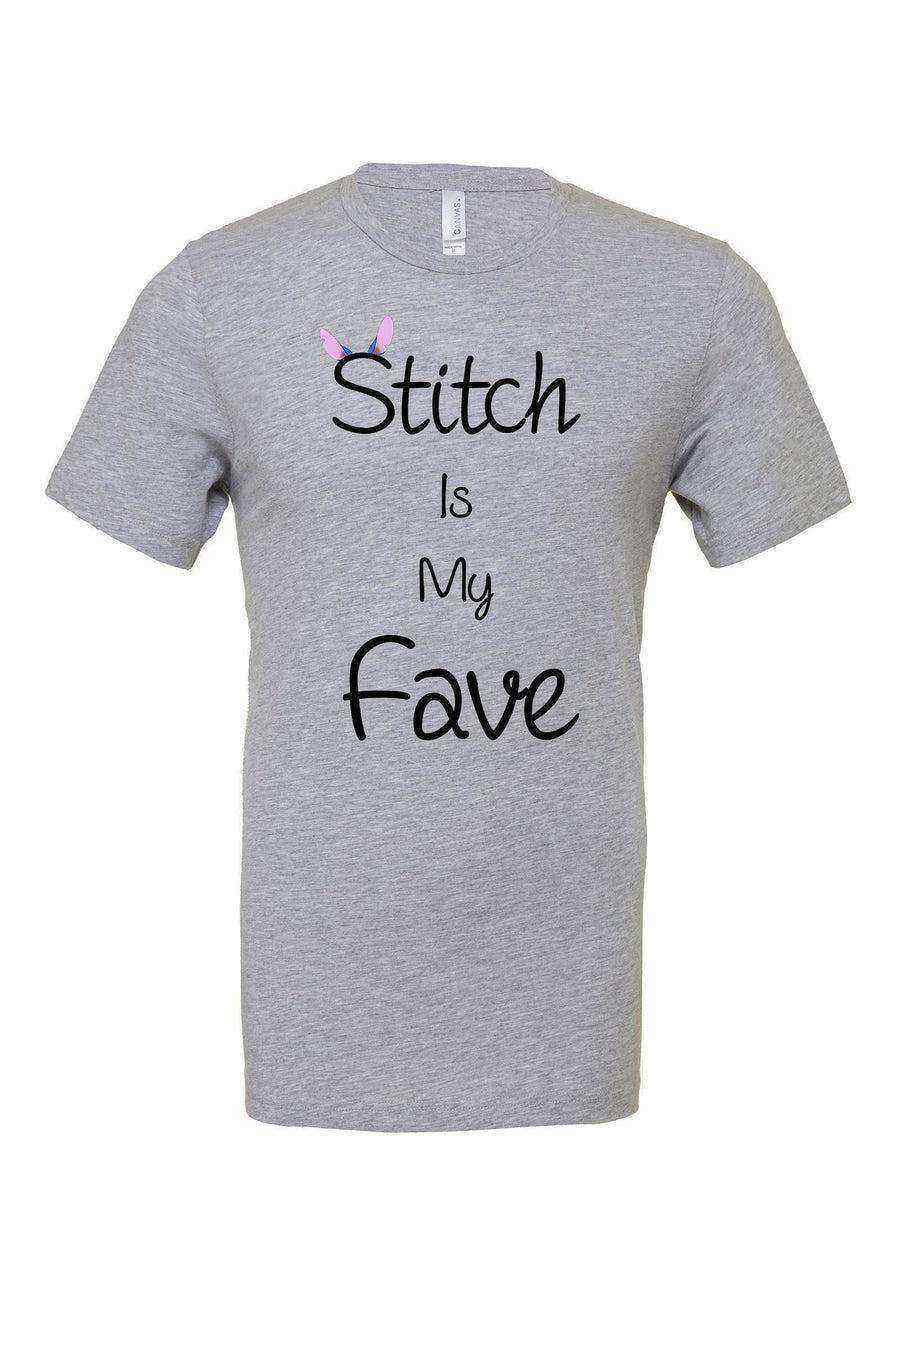 Womens | Stitch is my Fave Shirt - Dylan's Tees